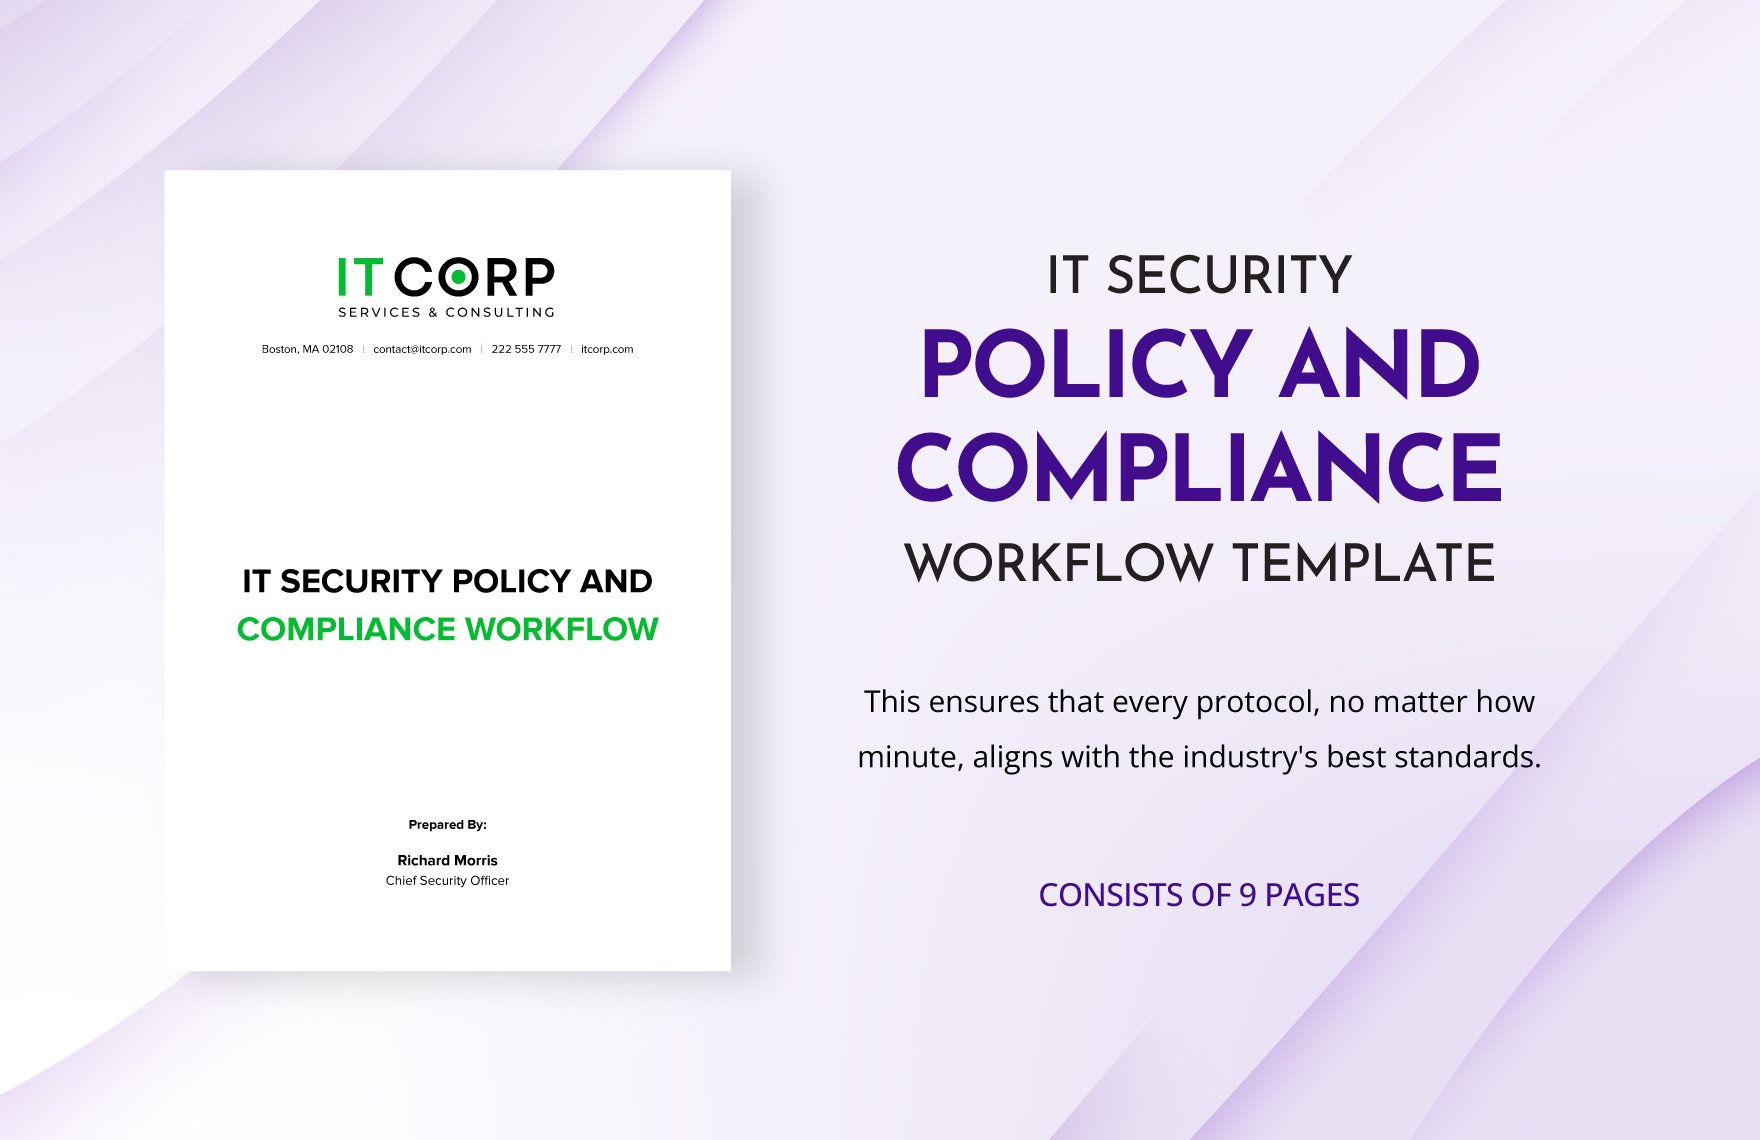 IT Security Policy & Compliance Workflow Template in Word, Google Docs, PDF